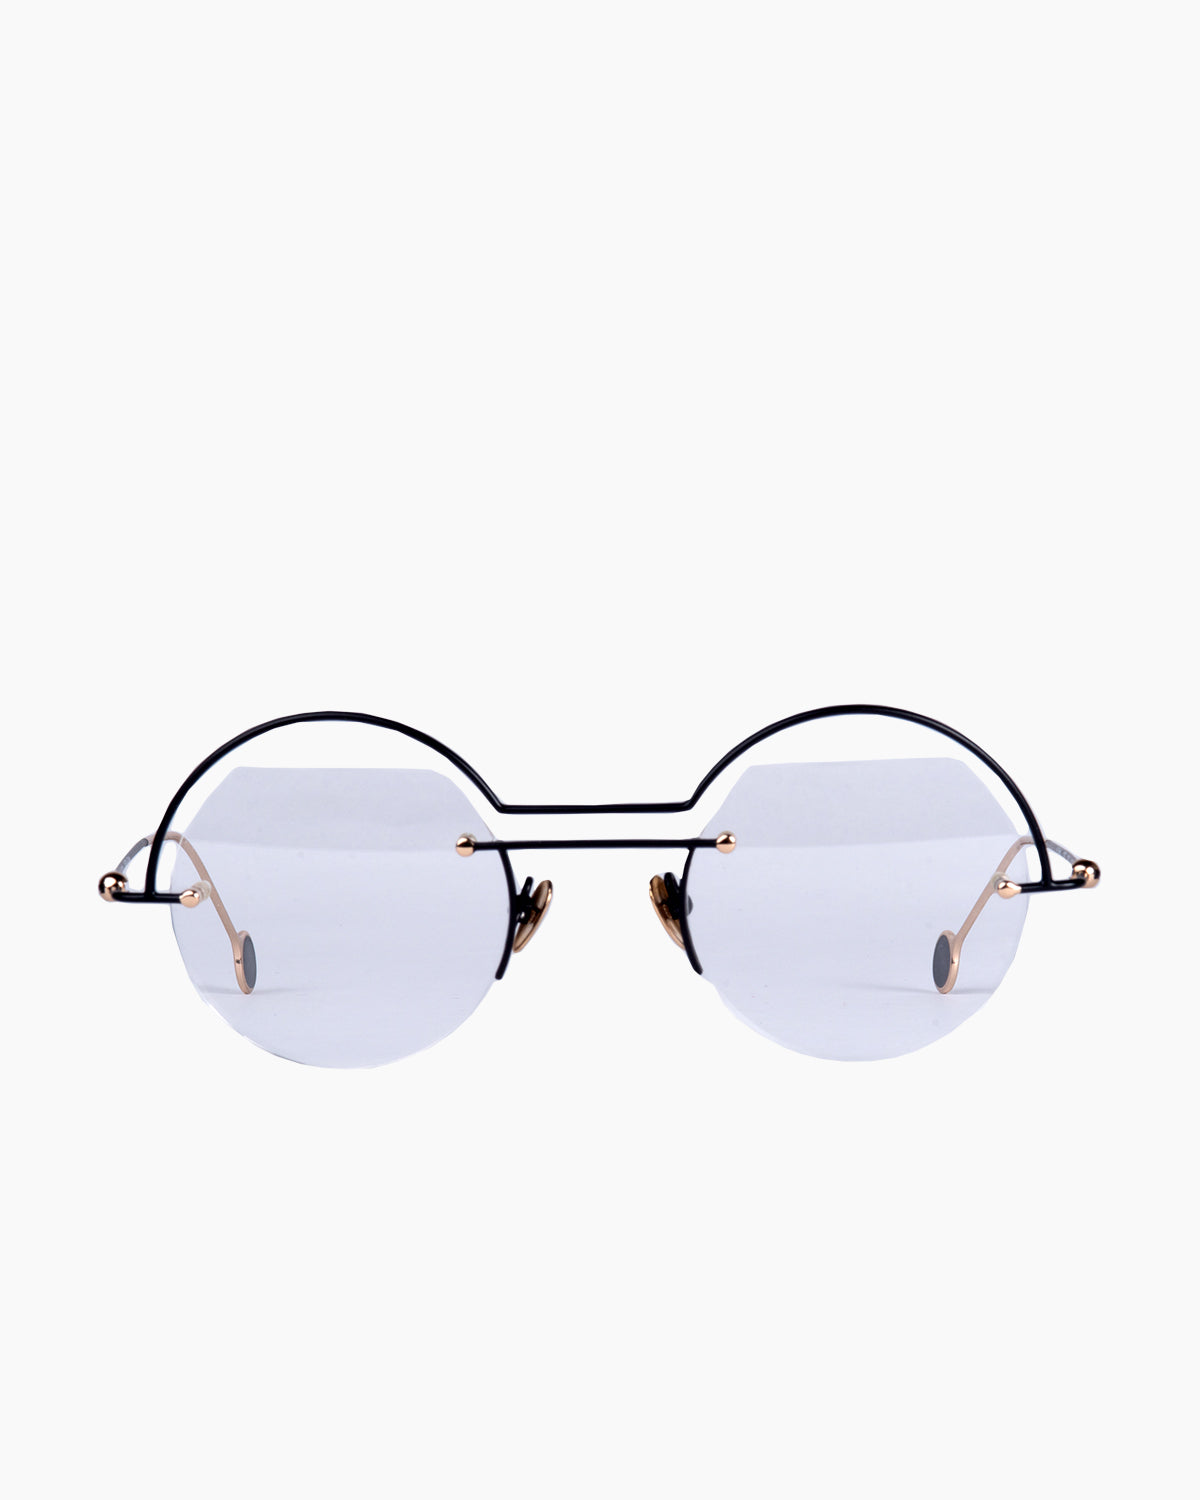 Anne and Valentin - CODE - 22A15 | glasses bar:  Marie-Sophie Dion